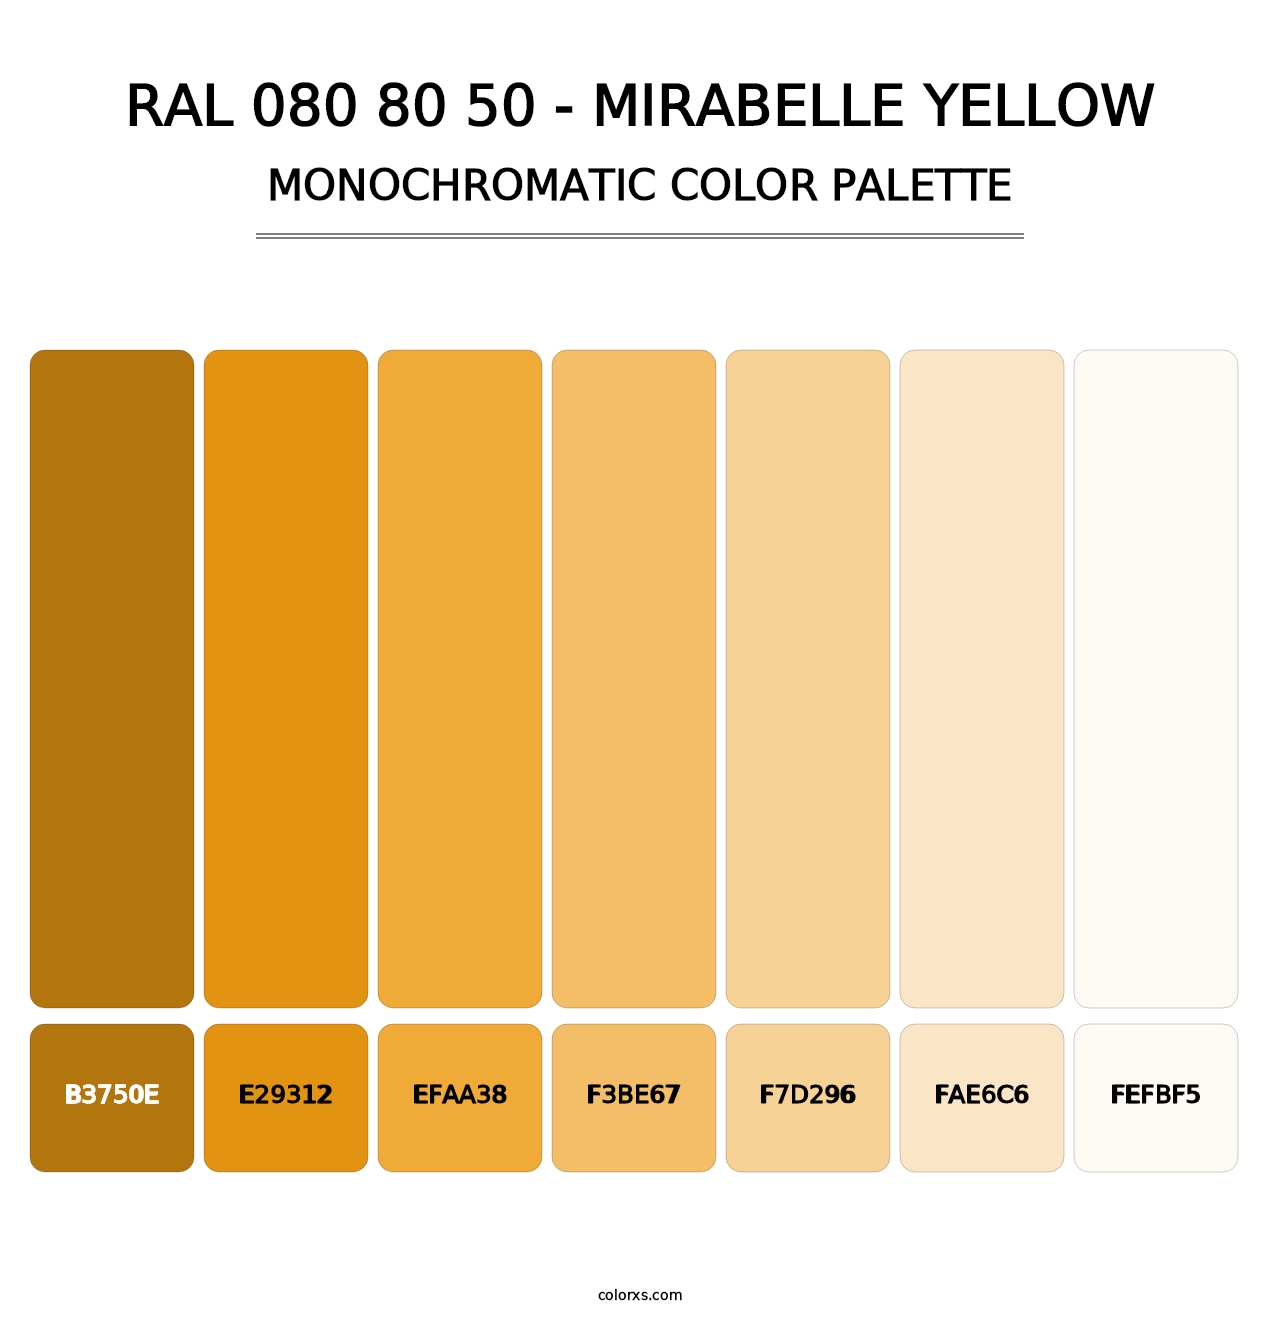 RAL 080 80 50 - Mirabelle Yellow - Monochromatic Color Palette